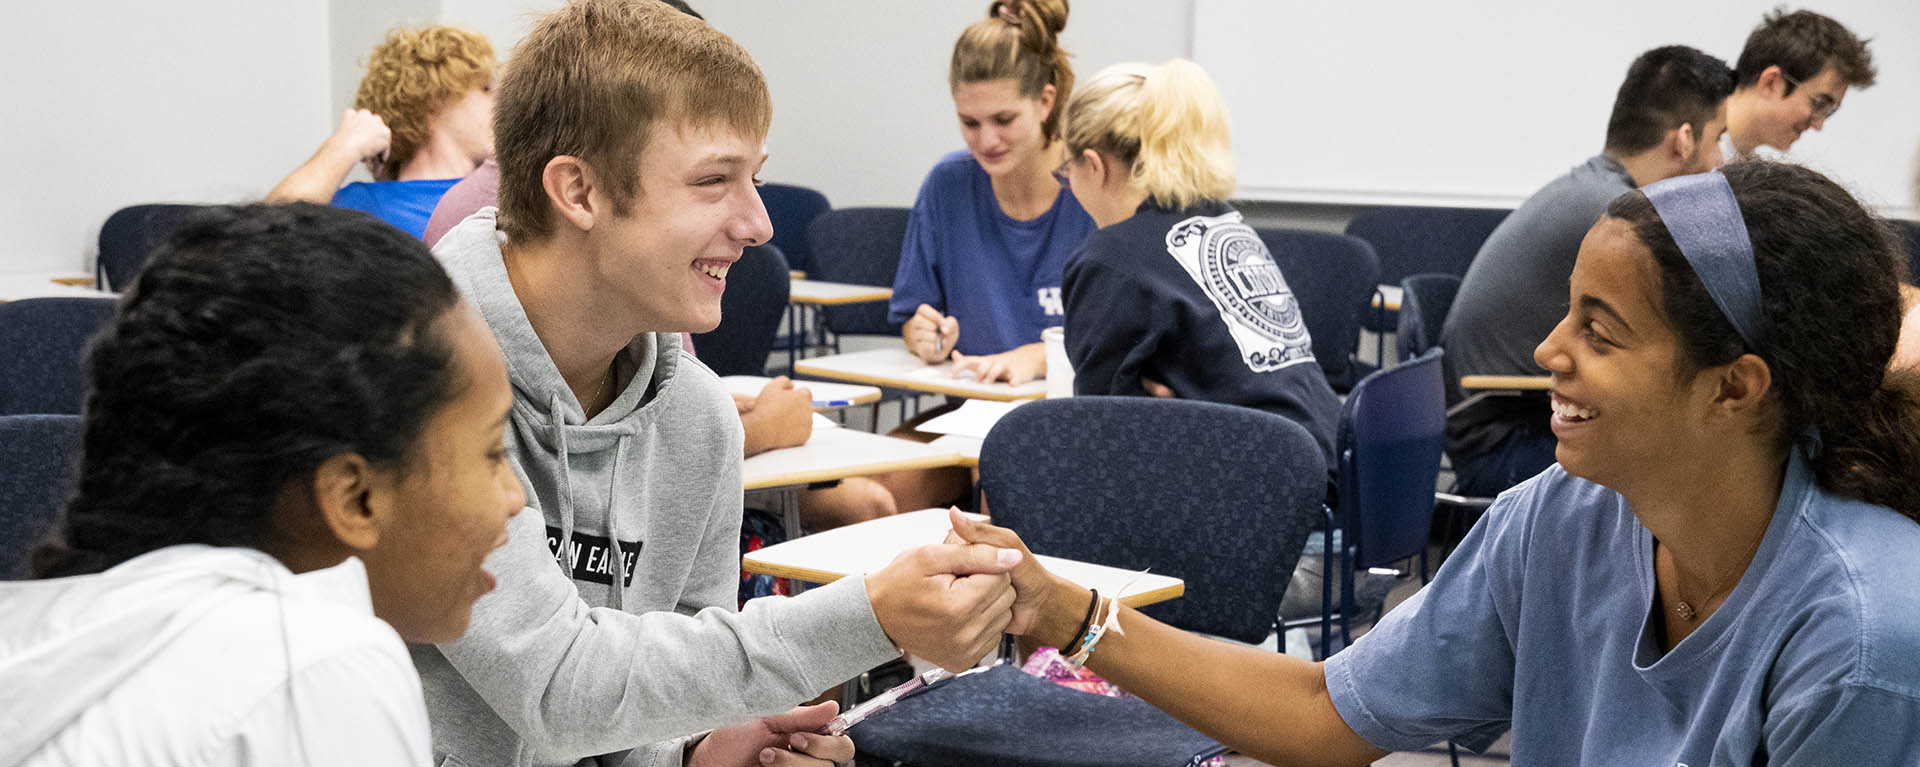 Students laugh and shake hands during a group discussion during class